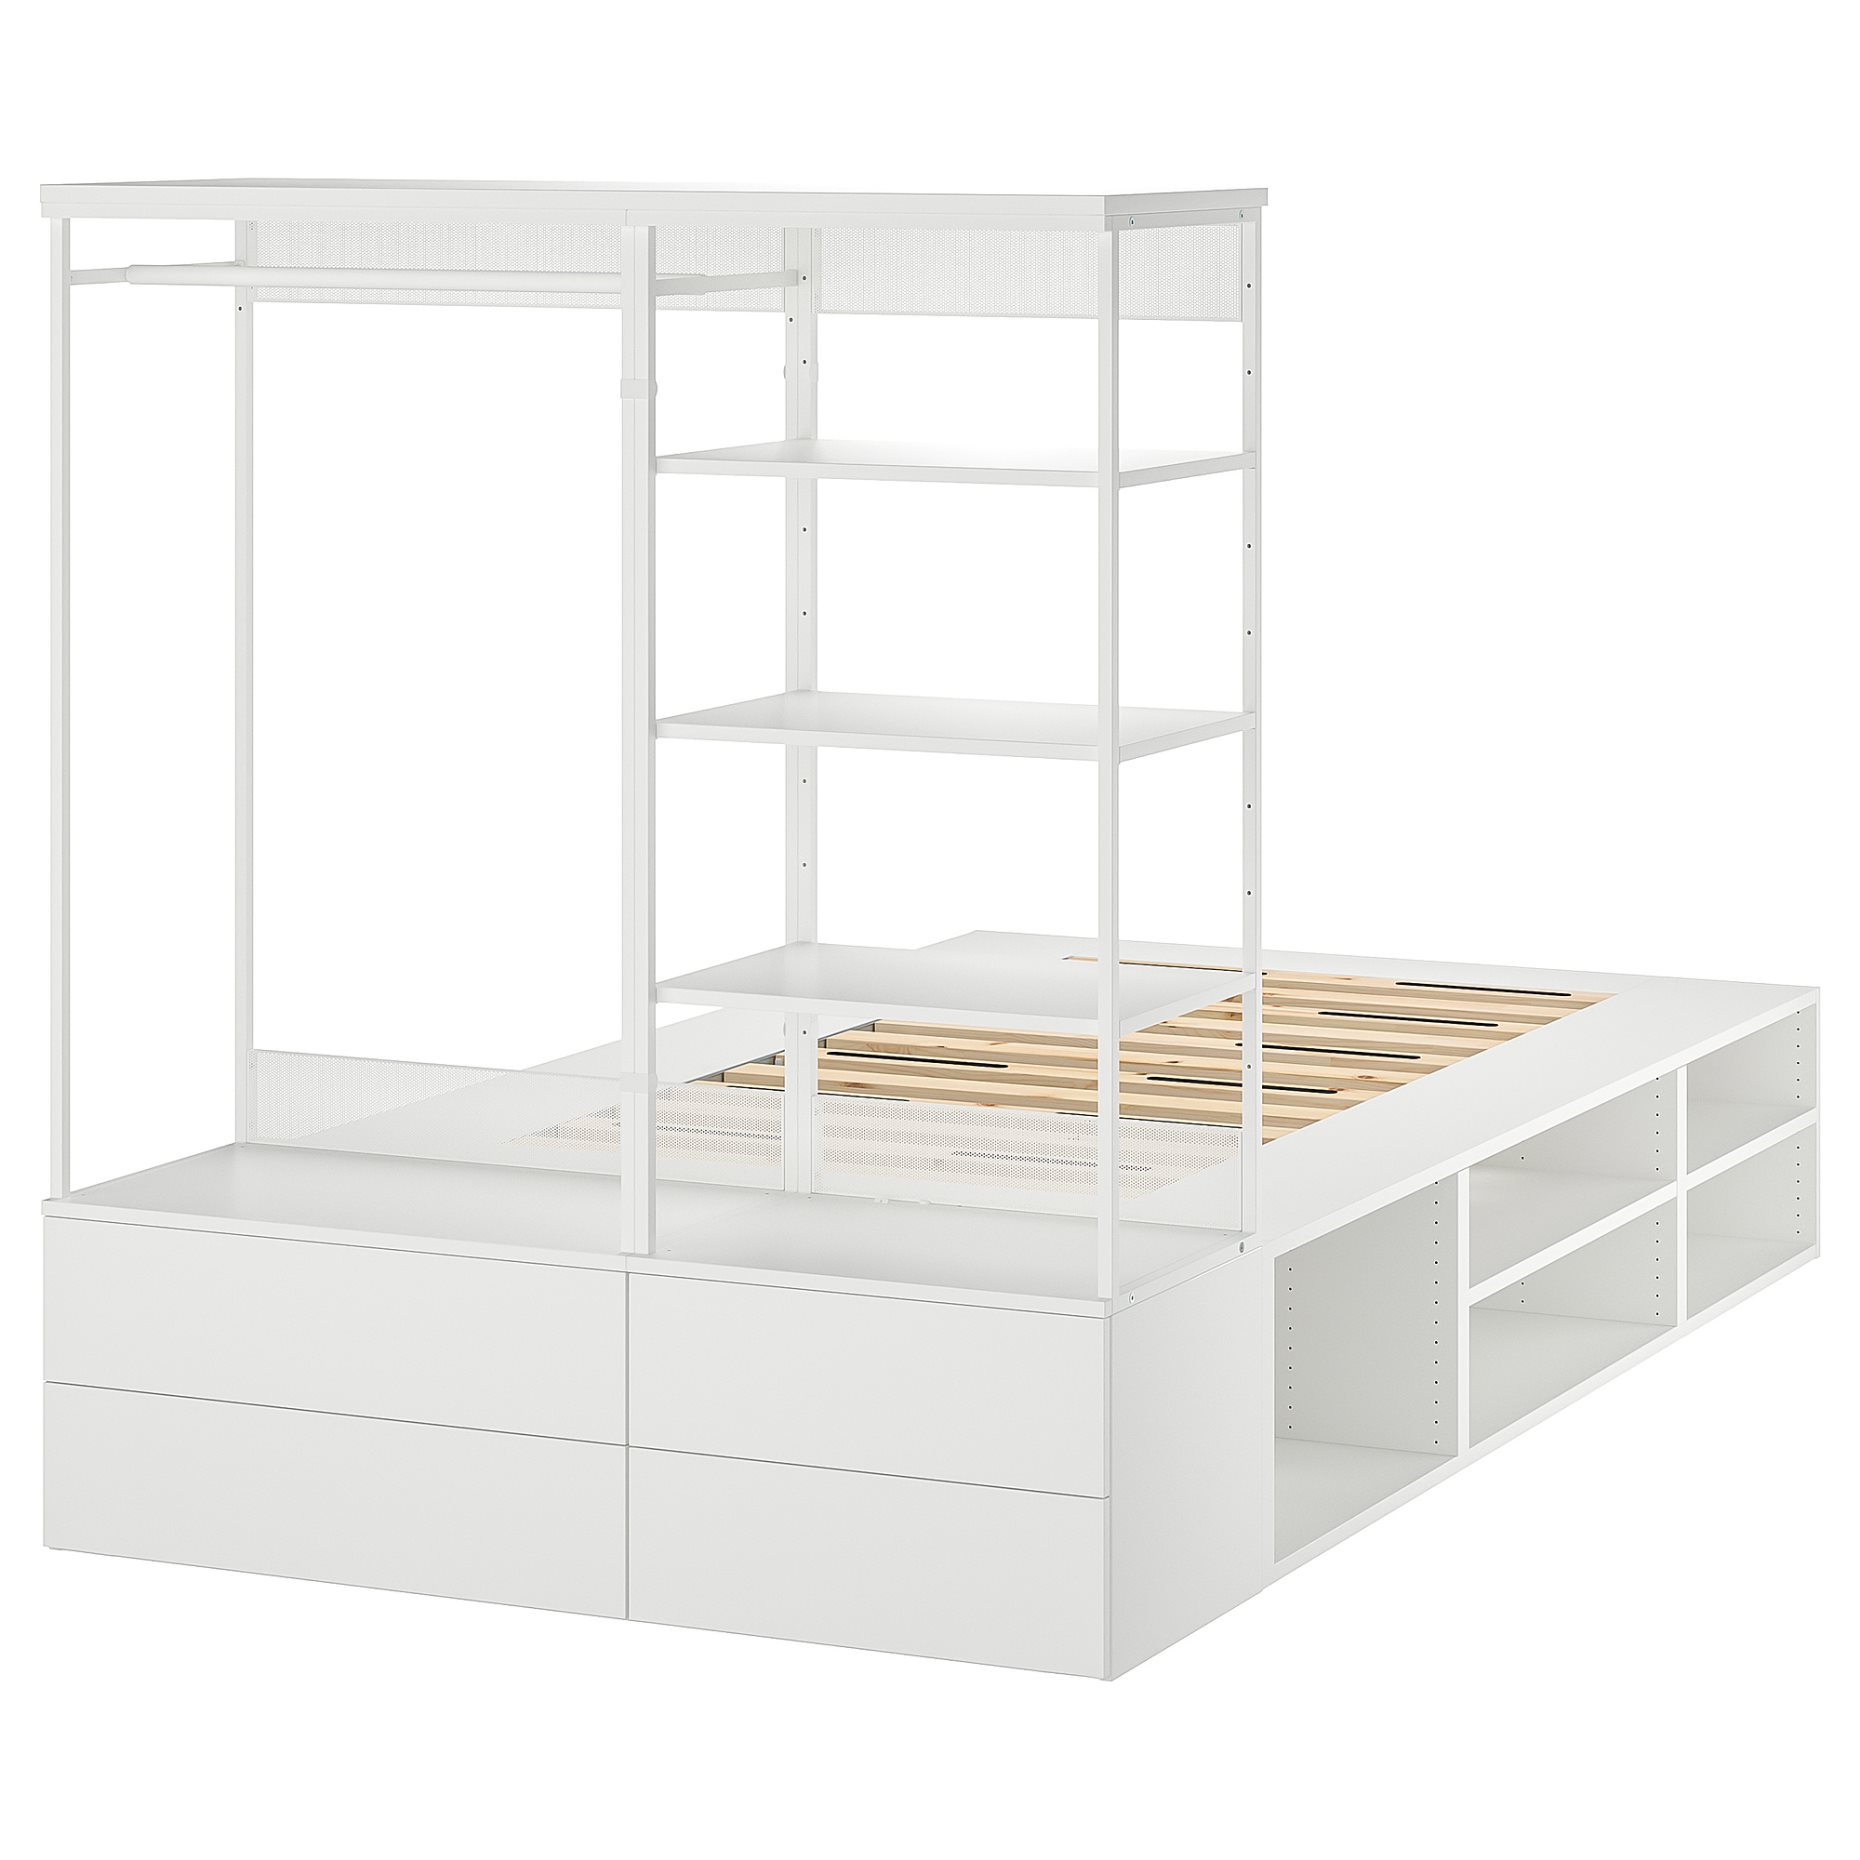 PLATSA, bed with 4 drawers, 140x244x163 cm, 893.264.63